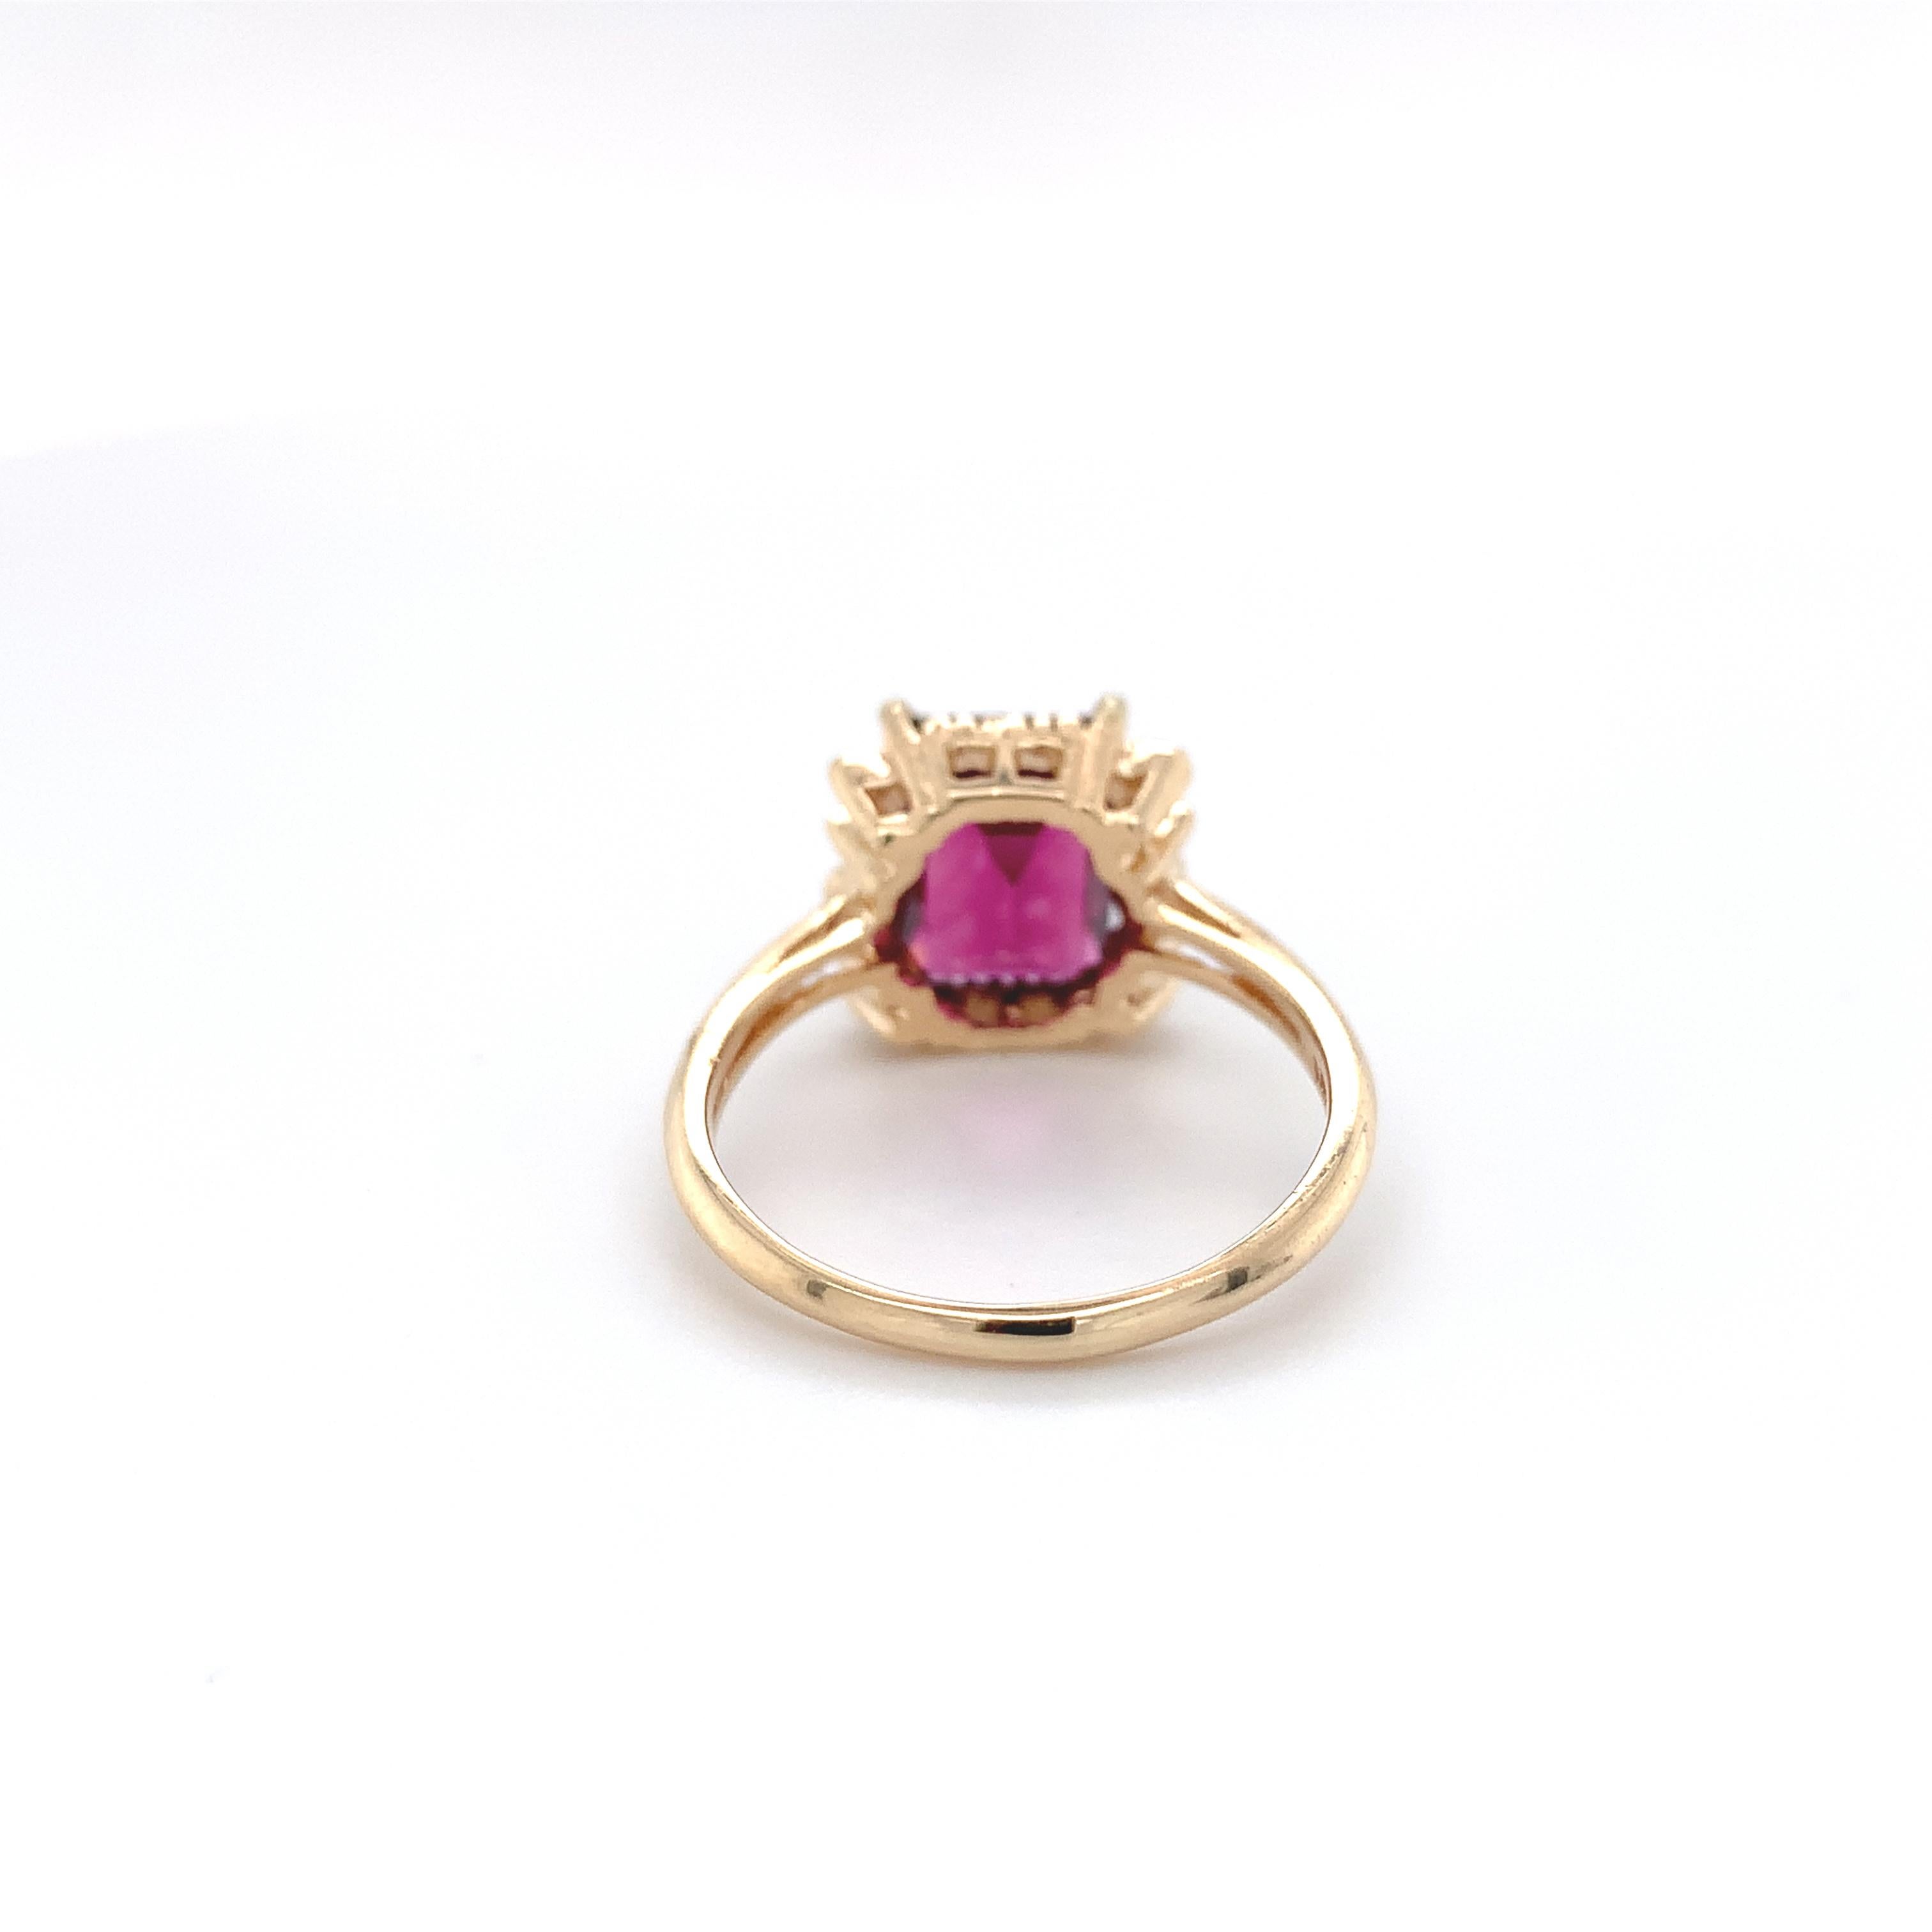 For Sale:  14K Yellow Gold Ring with Emerald Cut 3.51 carat Rhodolite Garnet 5